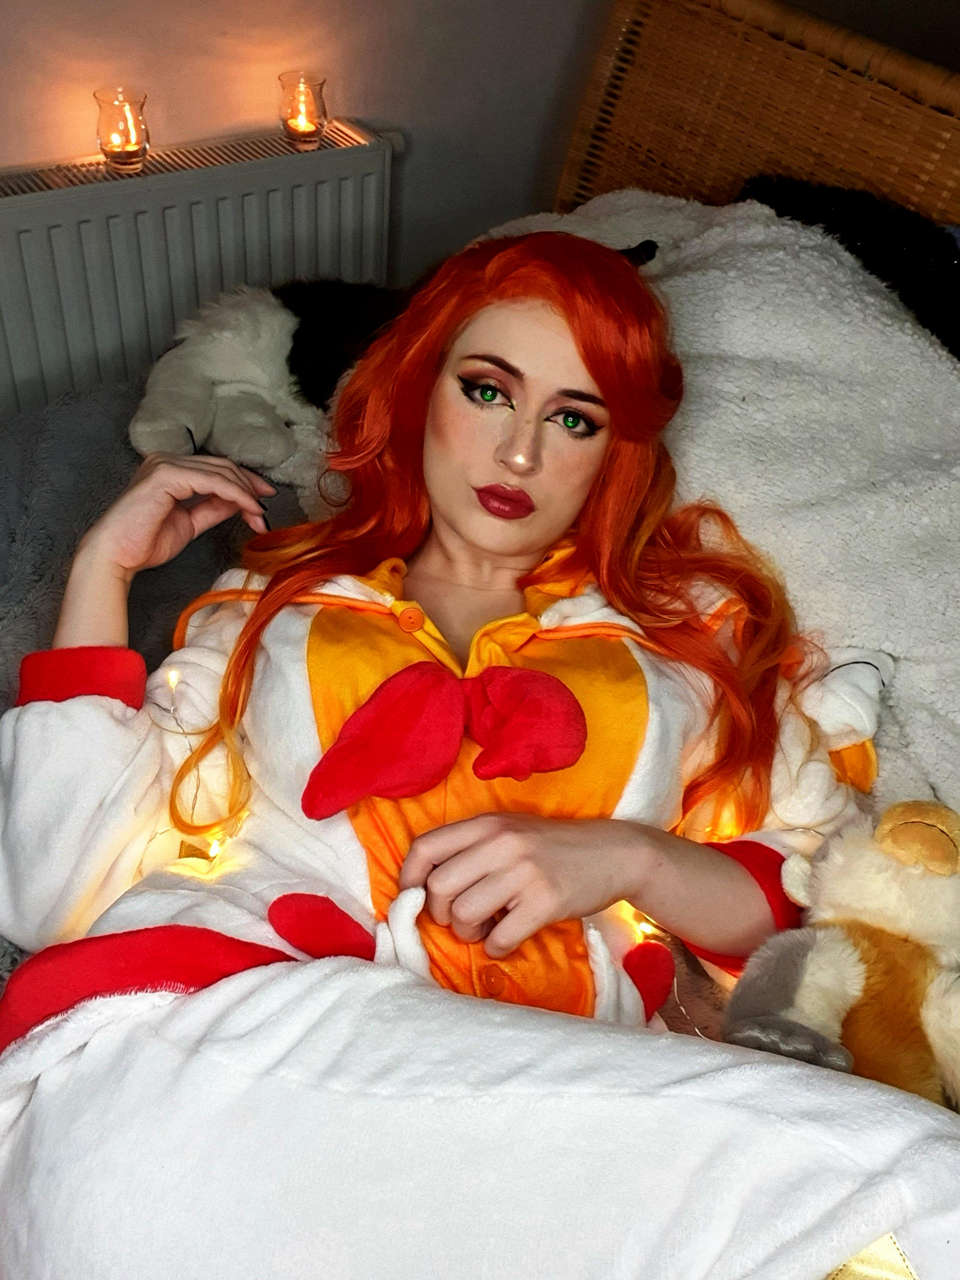 Pyjama Guardian Miss Fortune By Vokunzul Contains 6 Slides